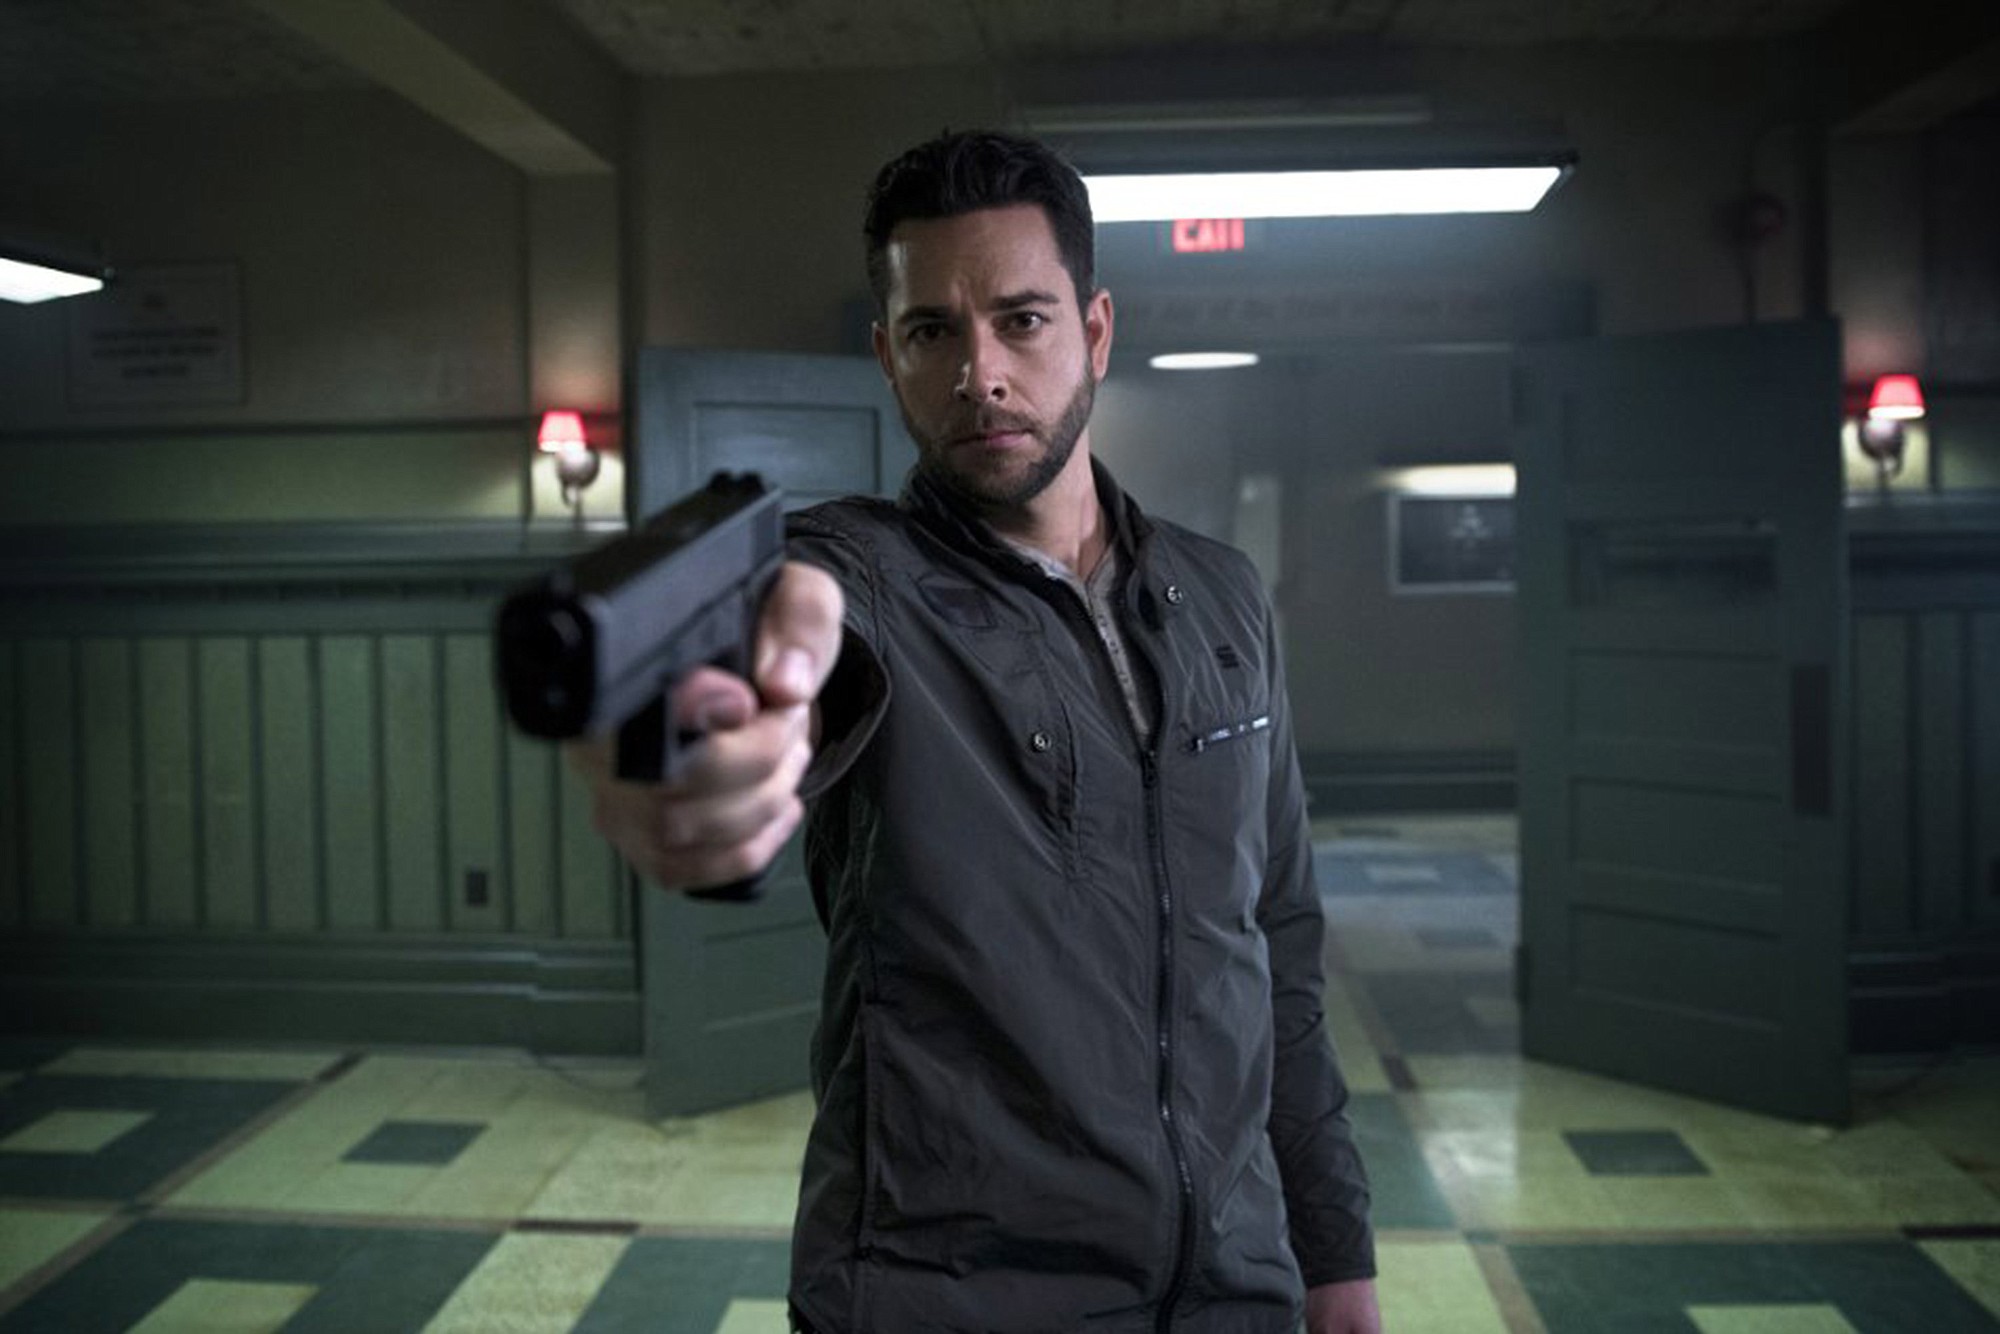 Zachary Levi has joined the &quot;Heroes&quot; universe.